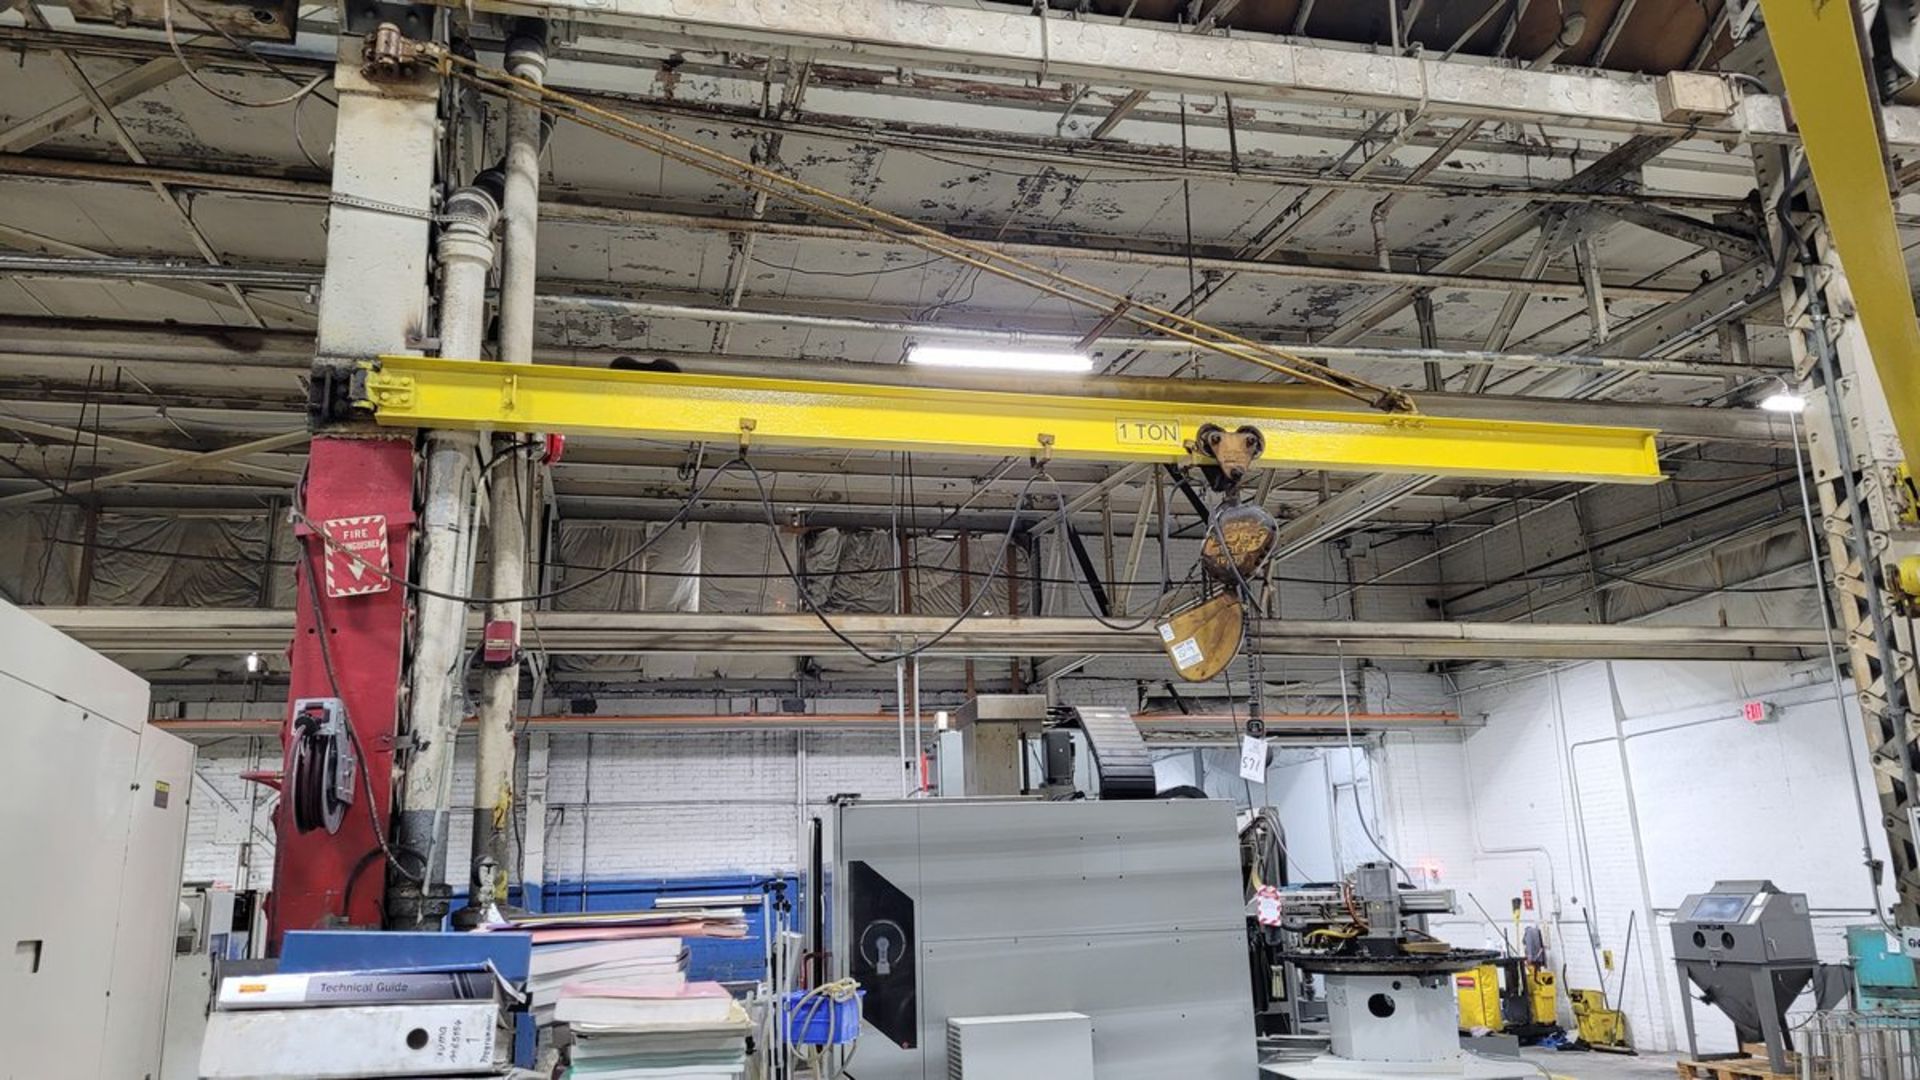 1 Ton Budgit Electric Chain Hoist, Beam Mounted 16' Jib with Pull Chain Controls